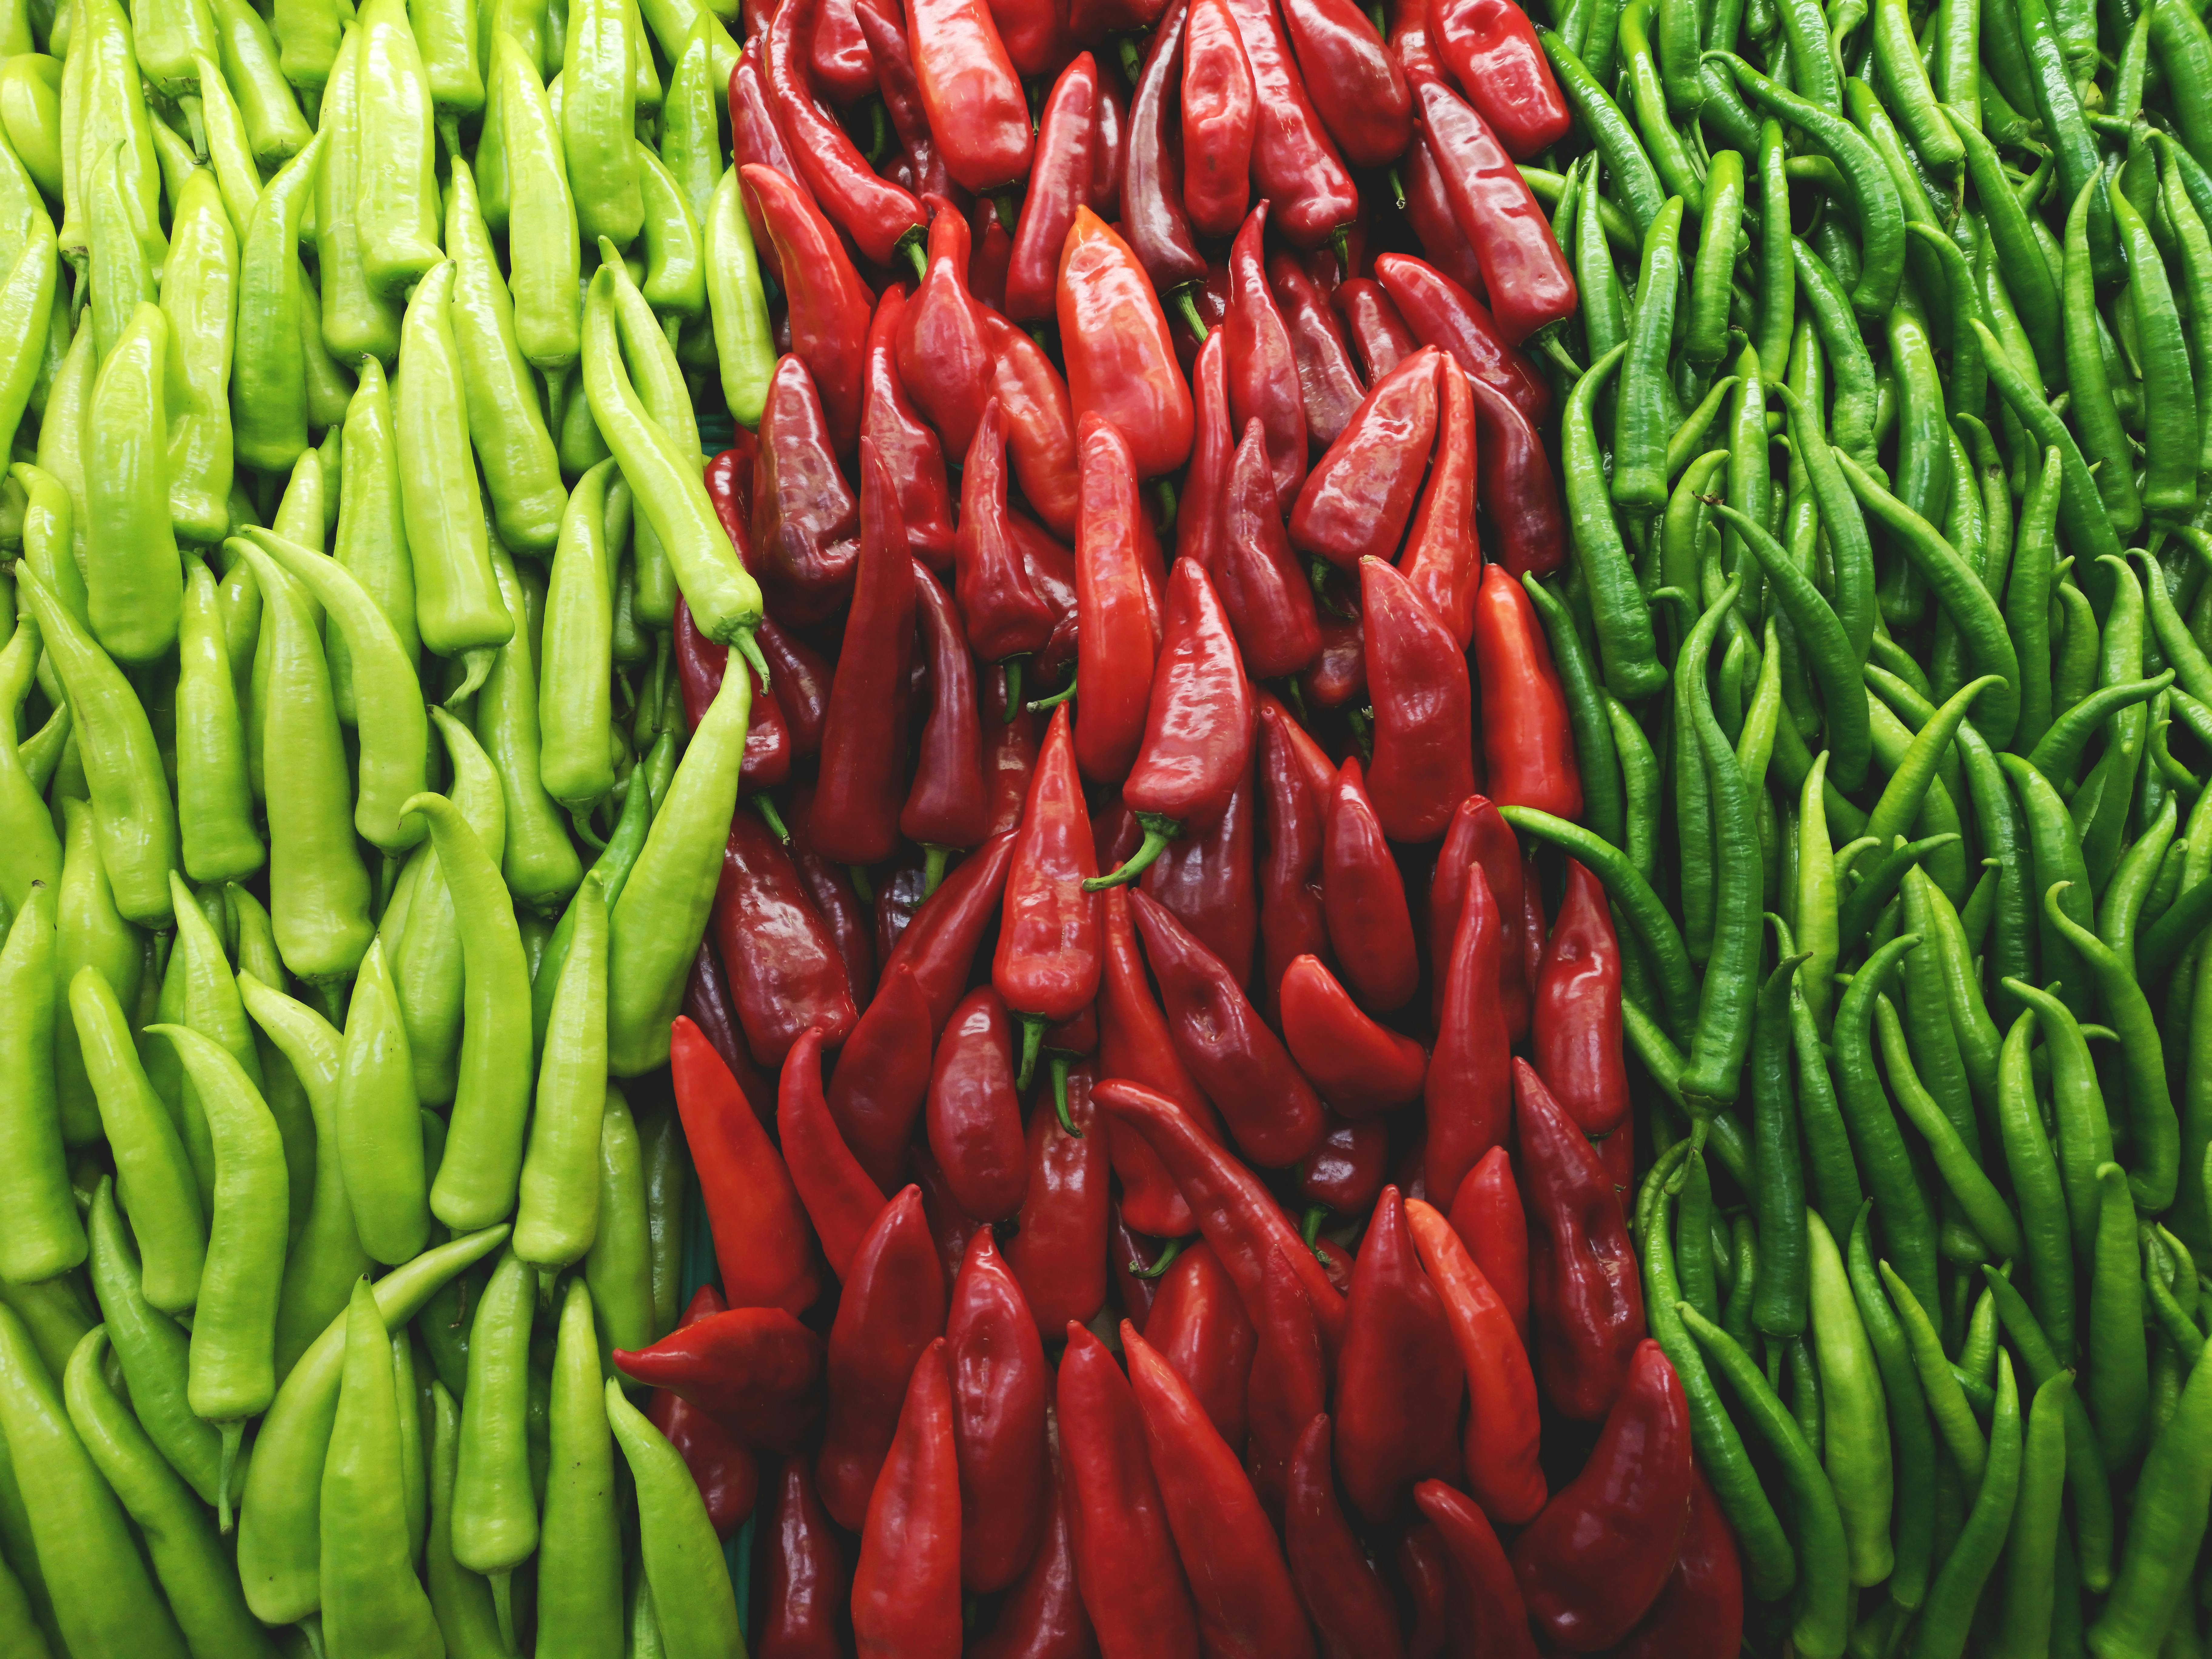 Spicy Stock Photos Royalty Free Spicy Images  Depositphotos